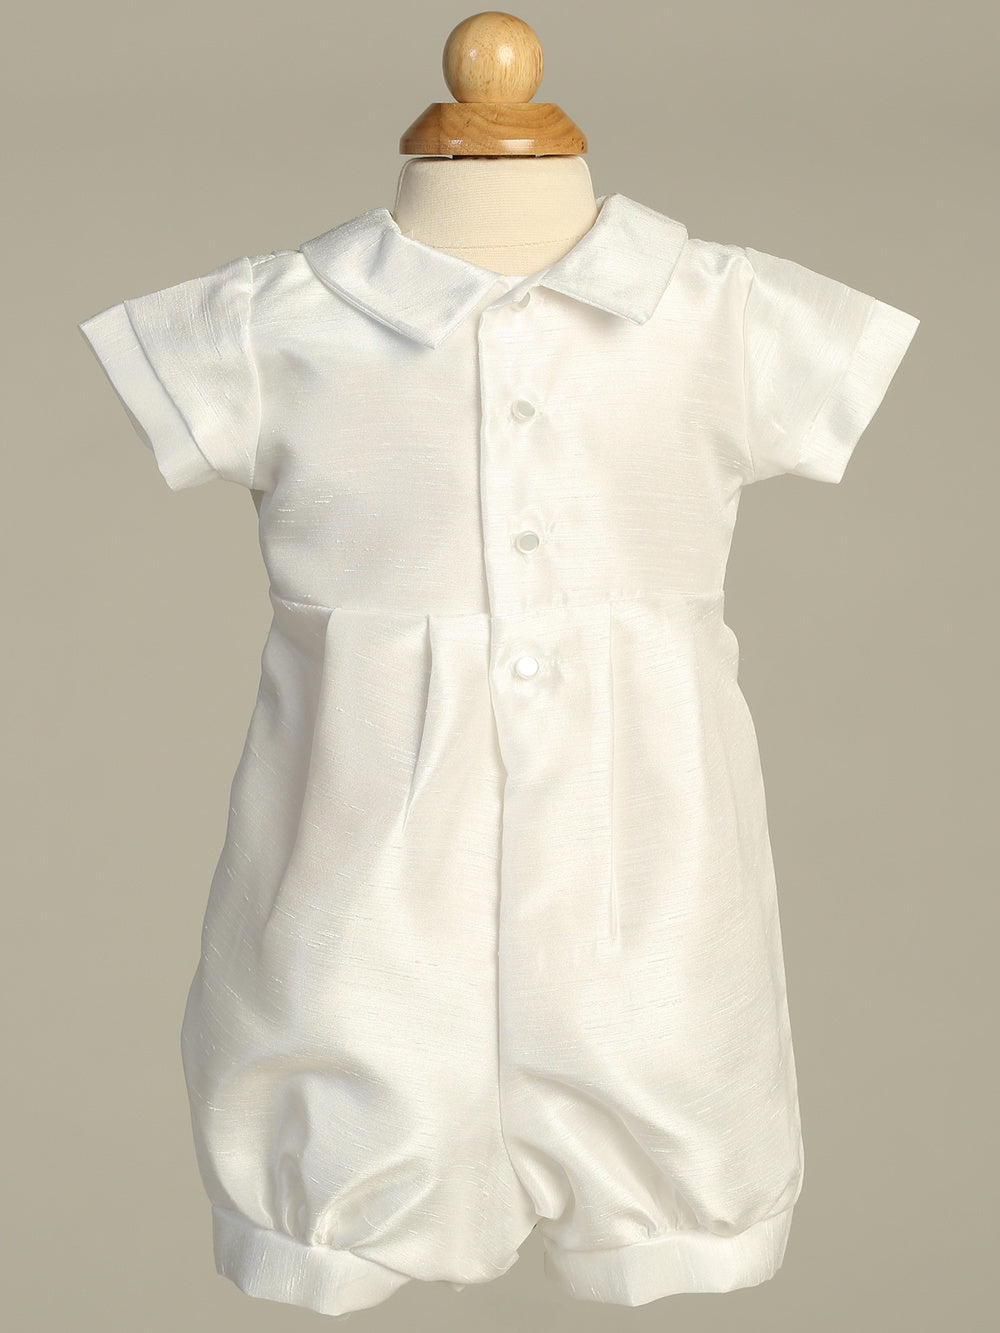 Shantung romper with embroidered cross and hat